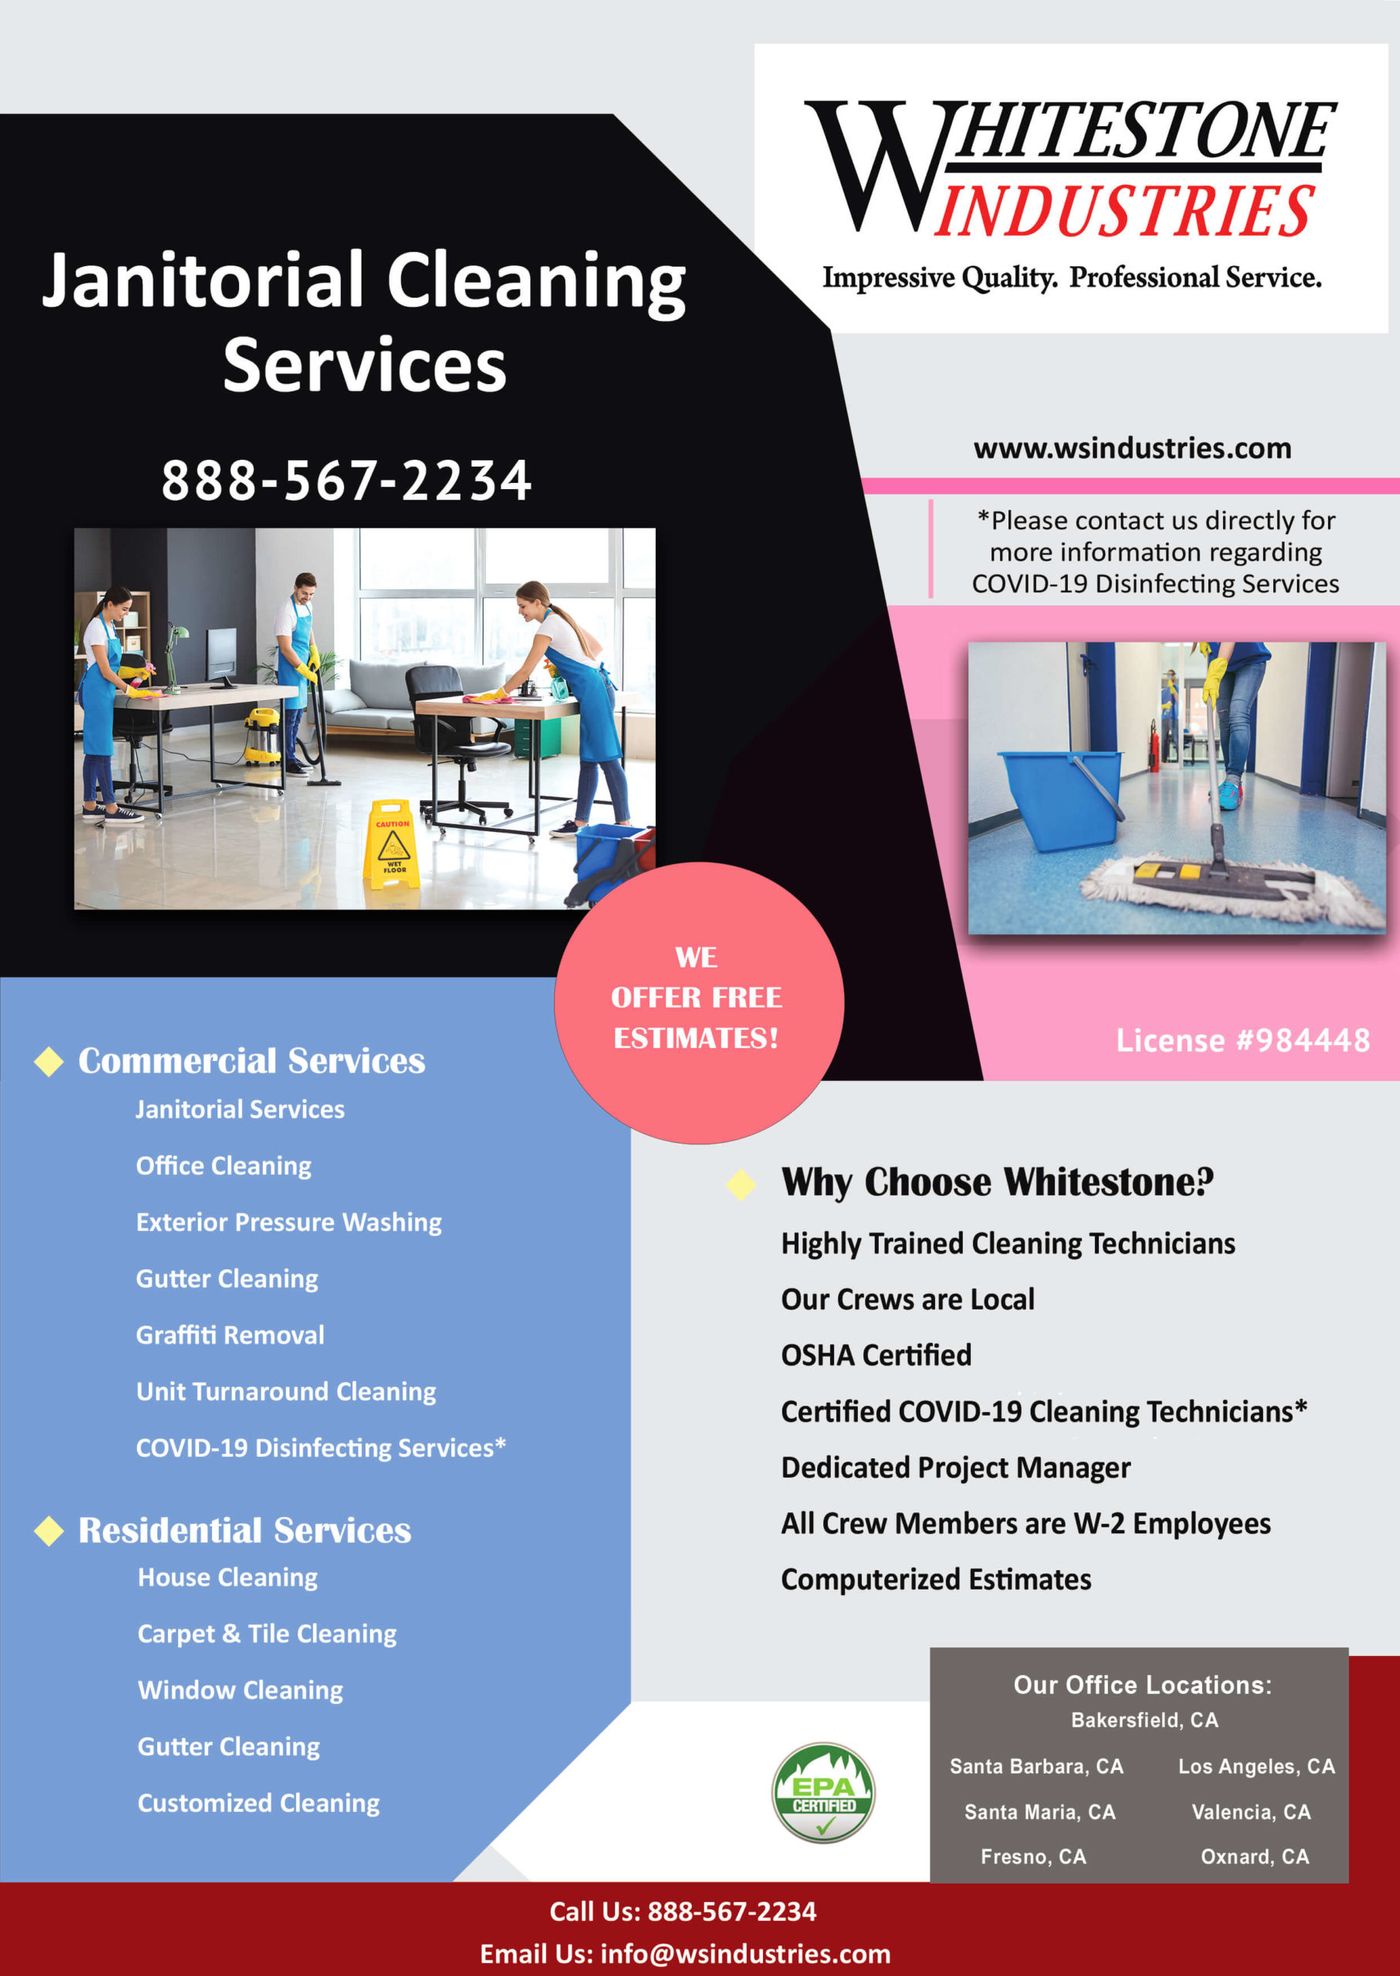 Janitorial-Flyer-2-NO-ABRA-1-scaled.jpg